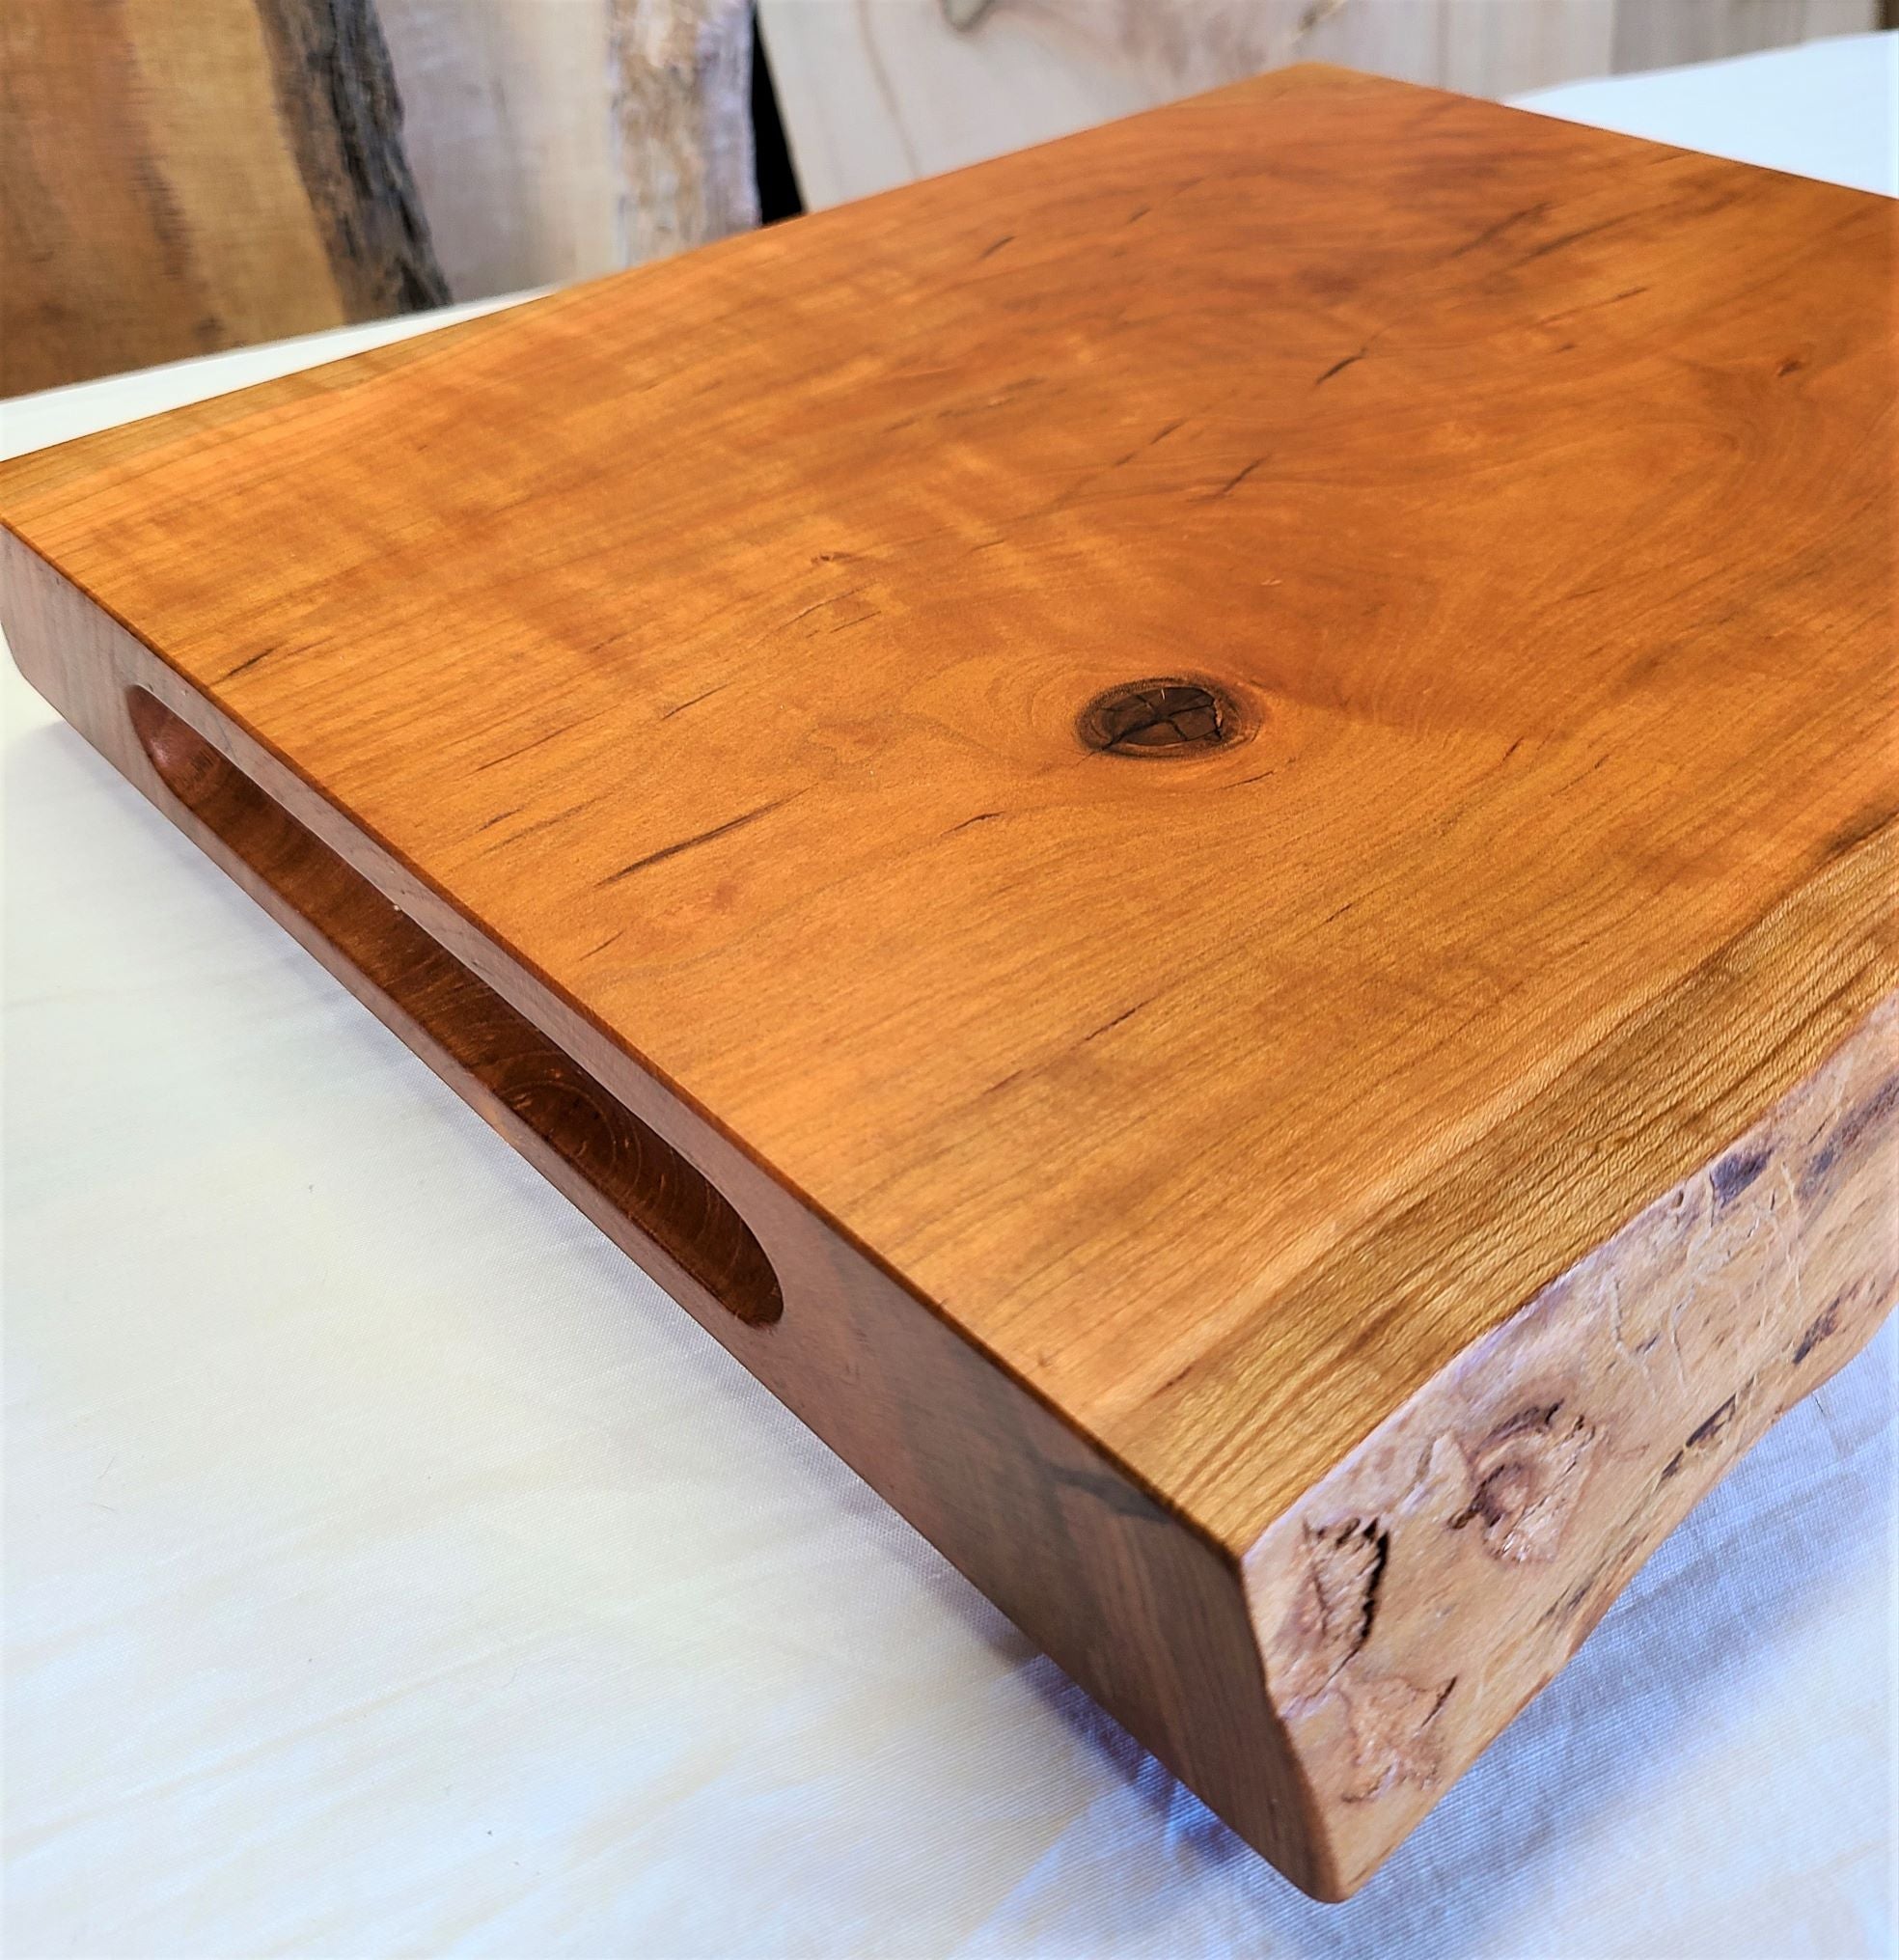 2" thick Cherry Cutting Board with routed finger grooves and features a live edge.  This custom cutting board is made in USA by ZimBoards.